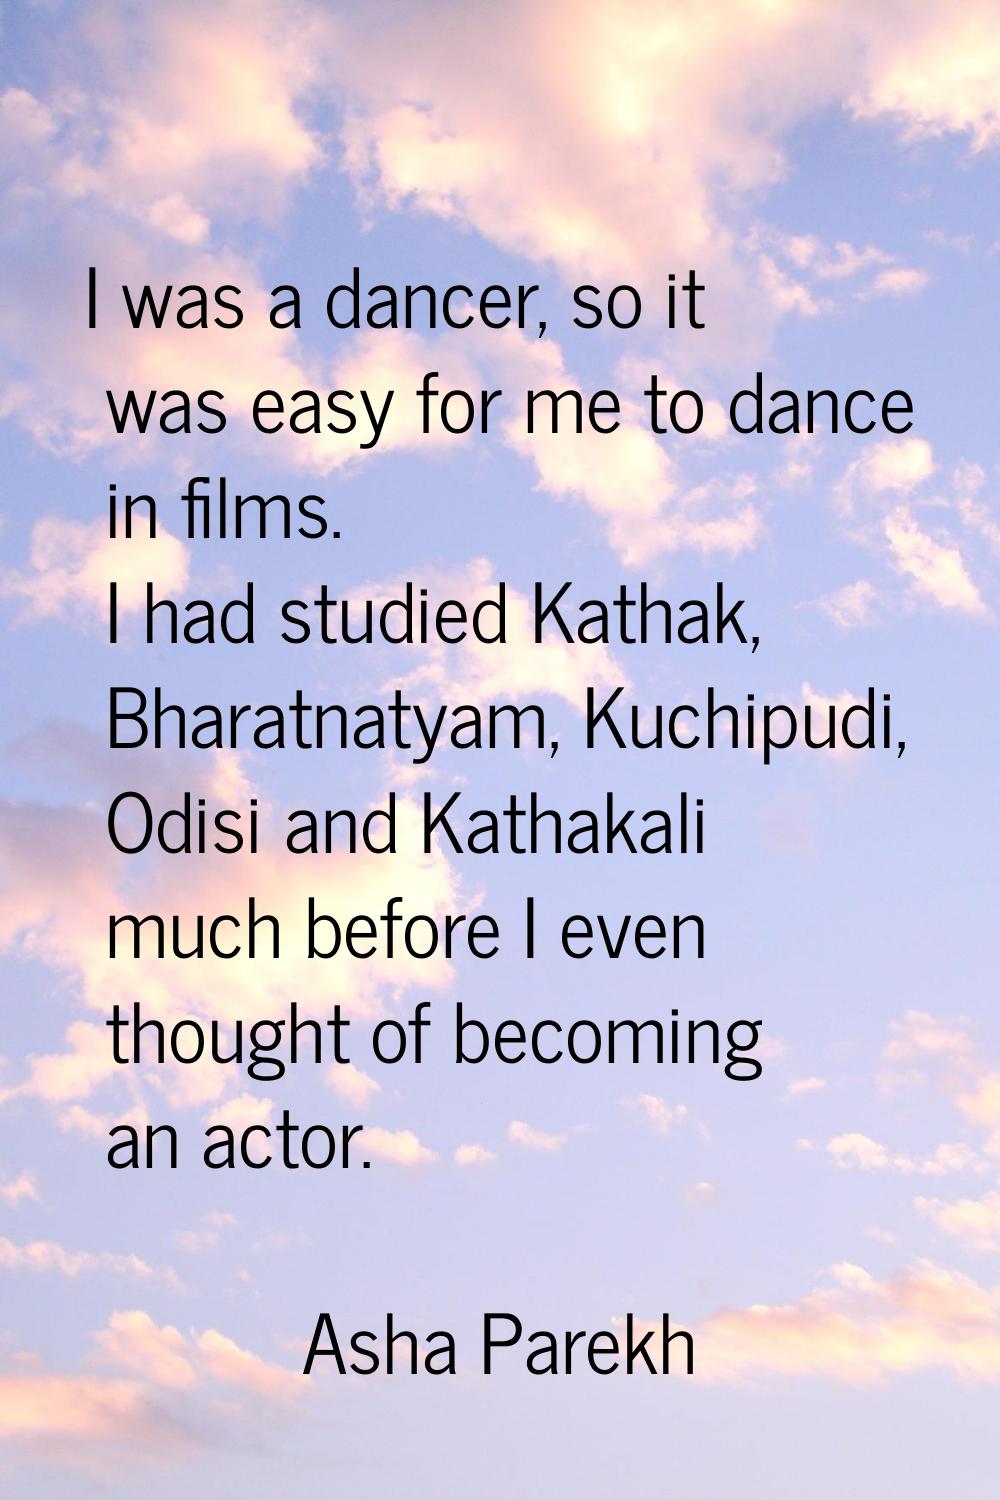 I was a dancer, so it was easy for me to dance in films. I had studied Kathak, Bharatnatyam, Kuchip